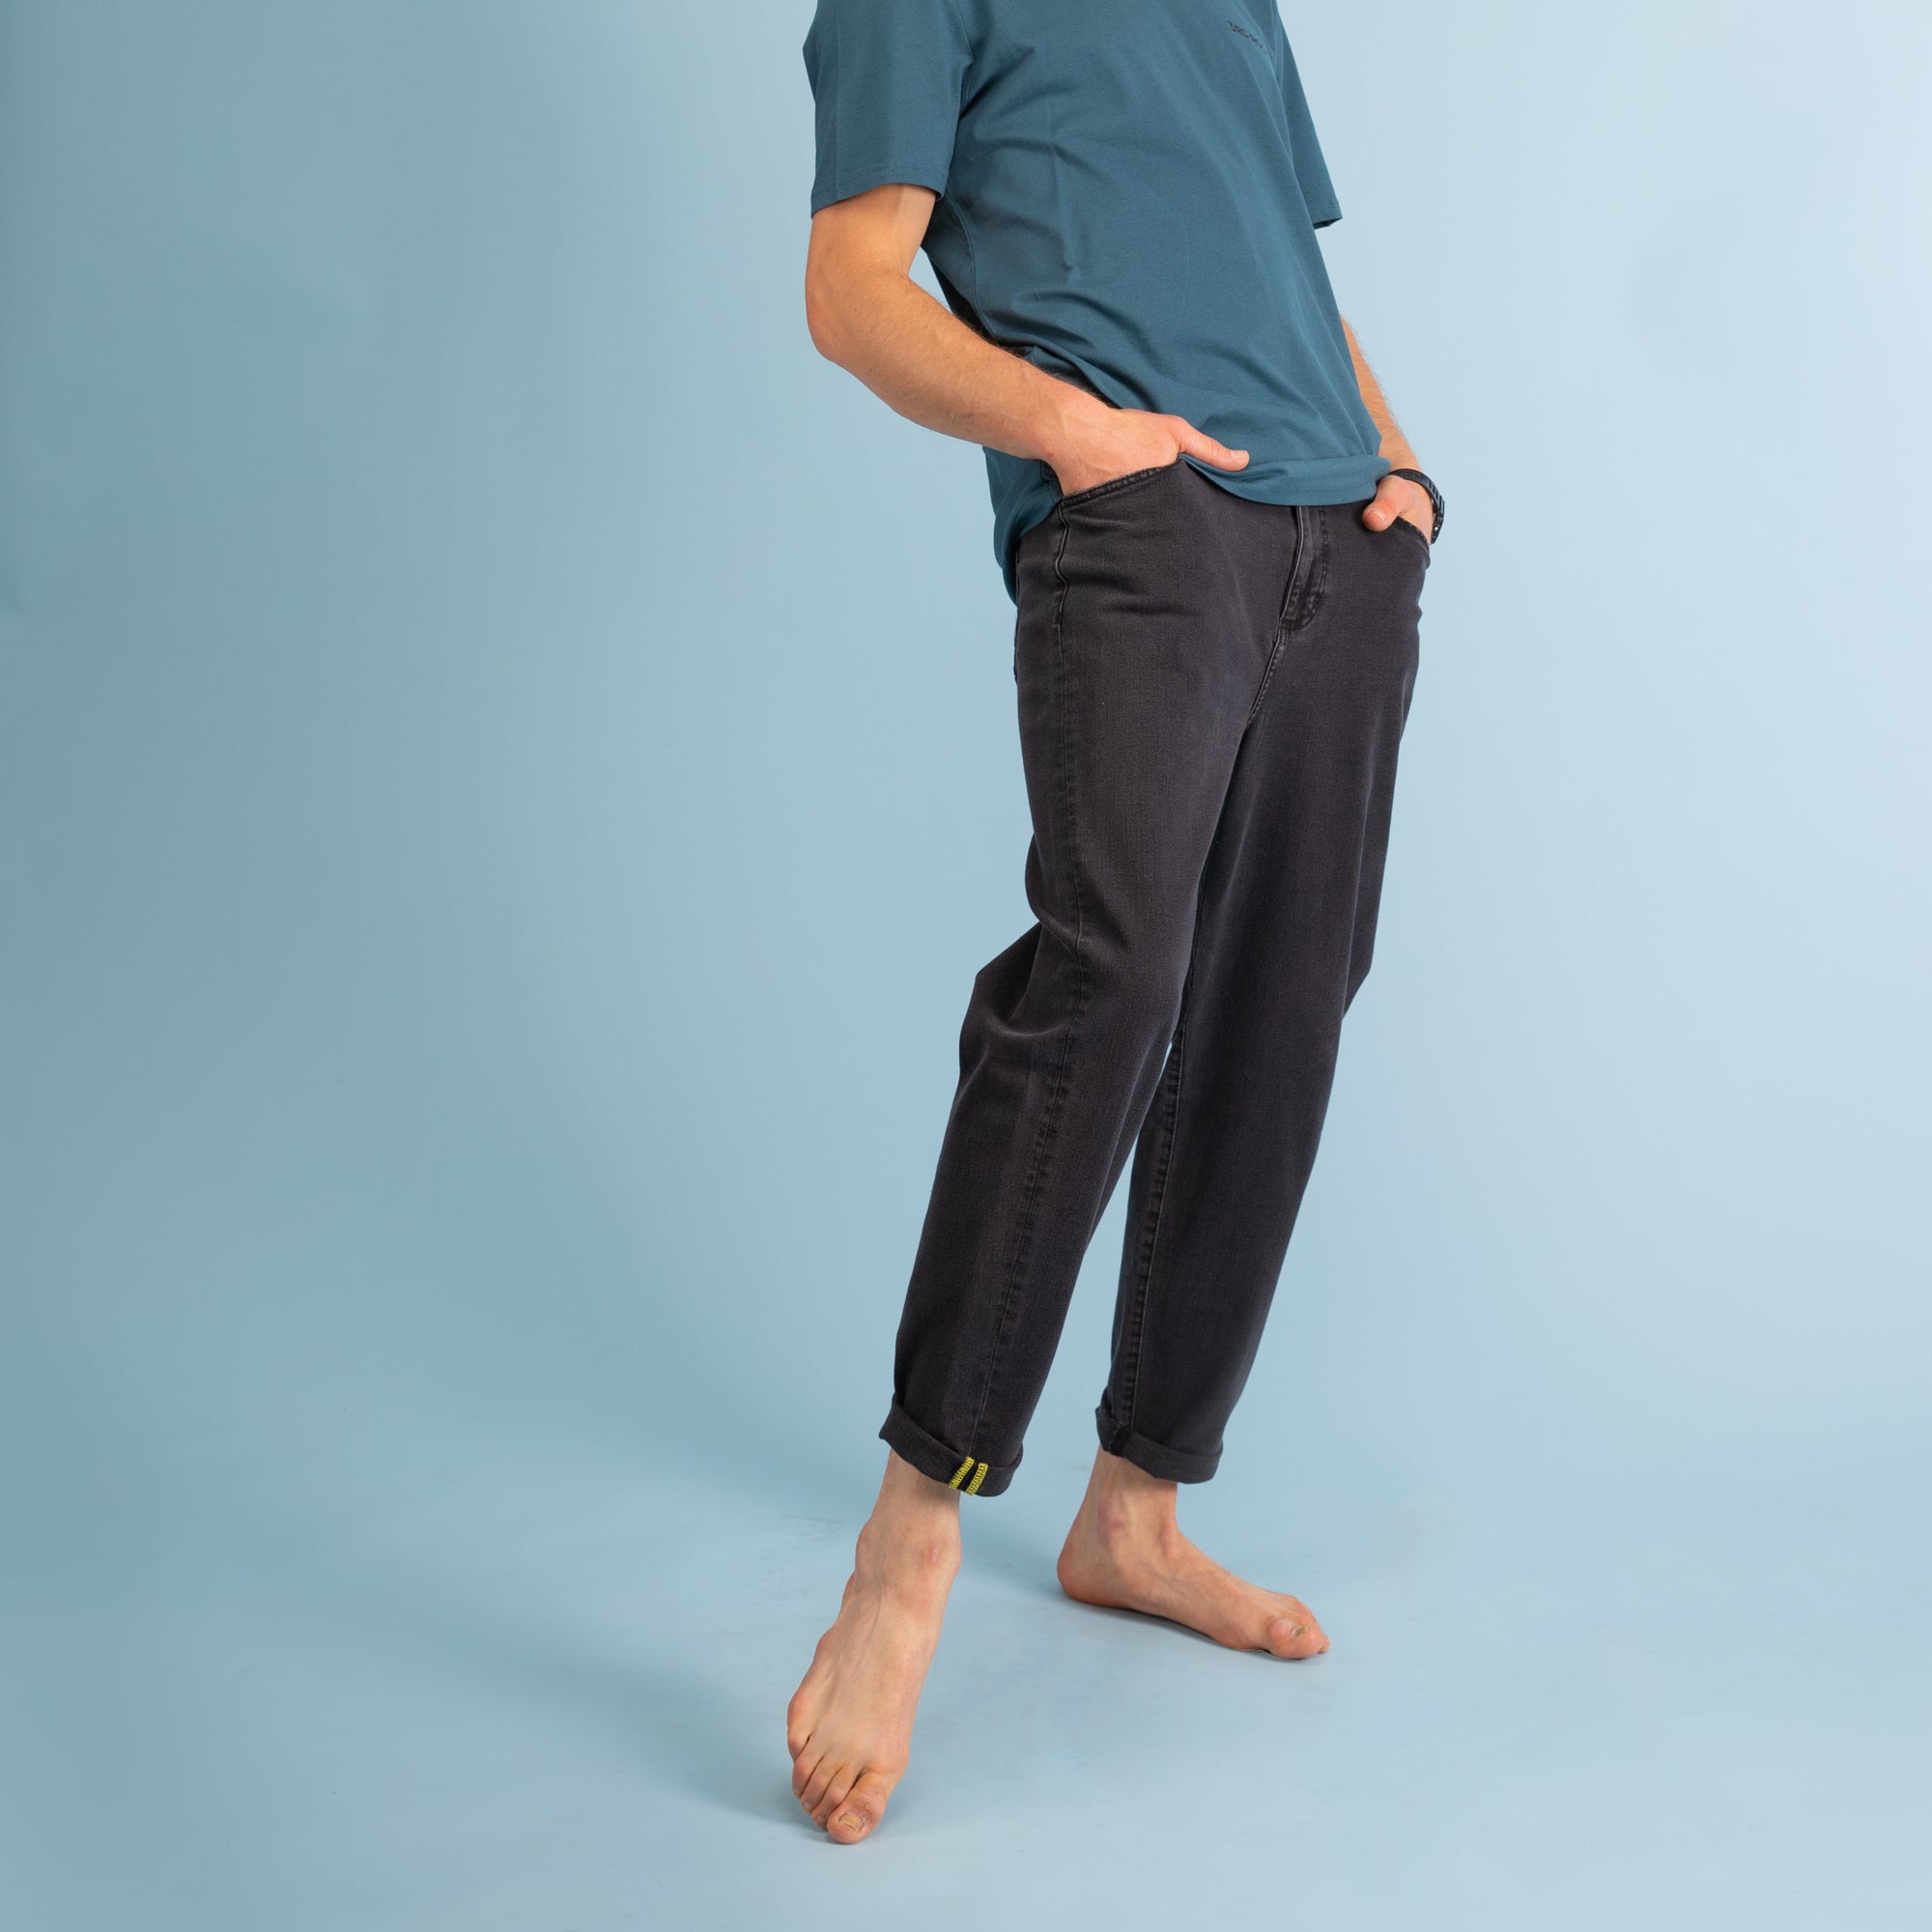 3RD ROCK comfy, stretchy and sustainable unisex jeans. M